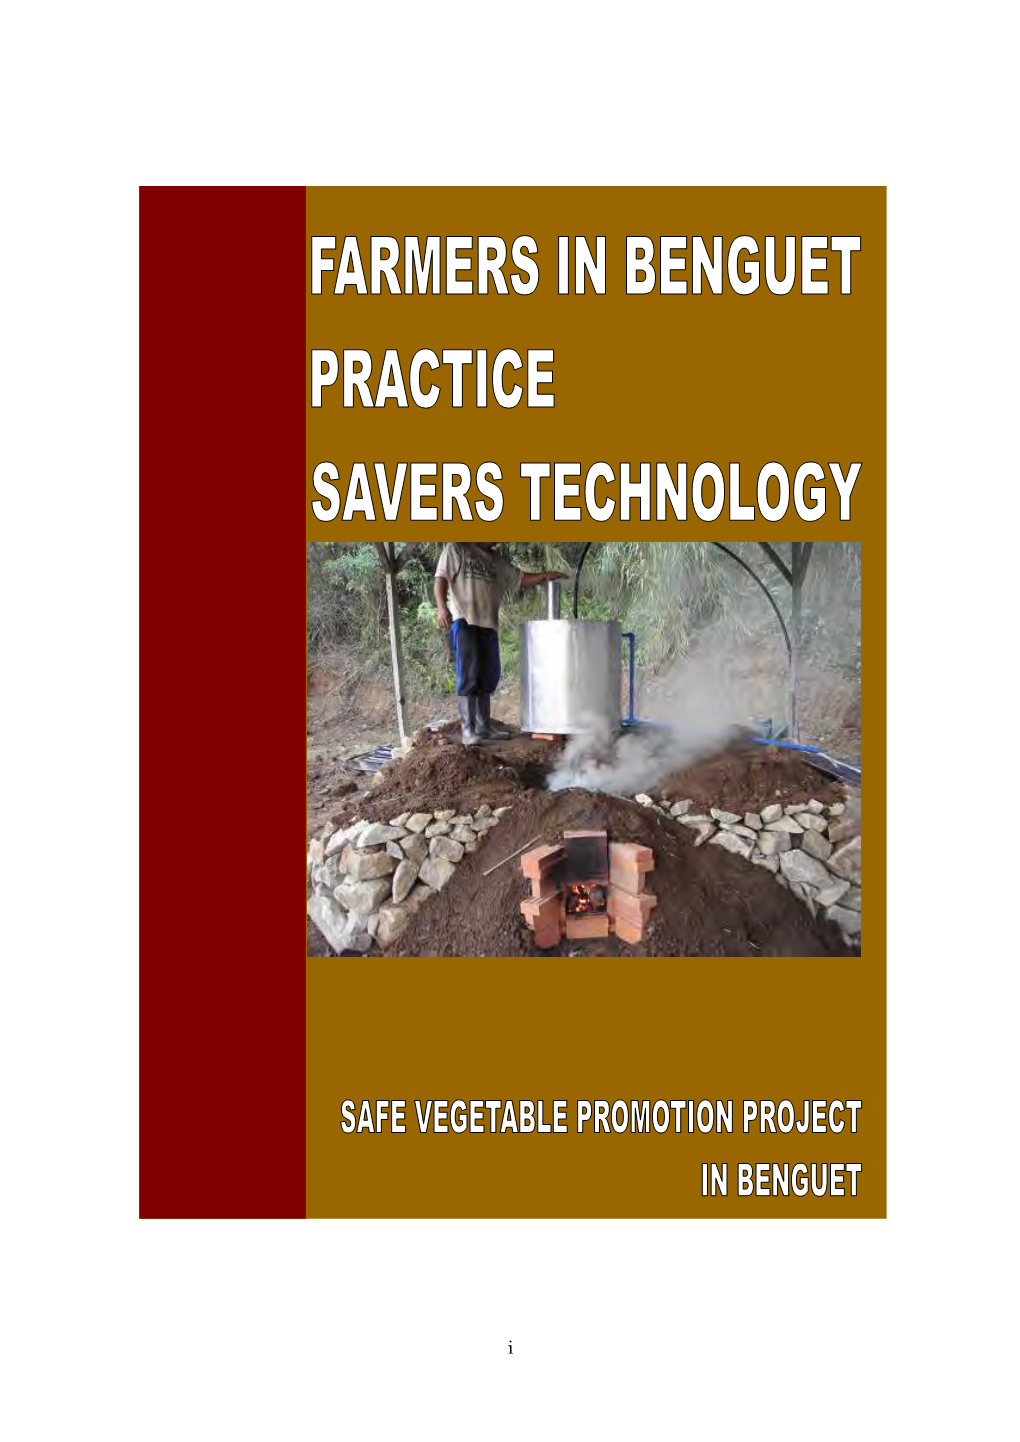 Farmers in Benguet Practice Savers Technology